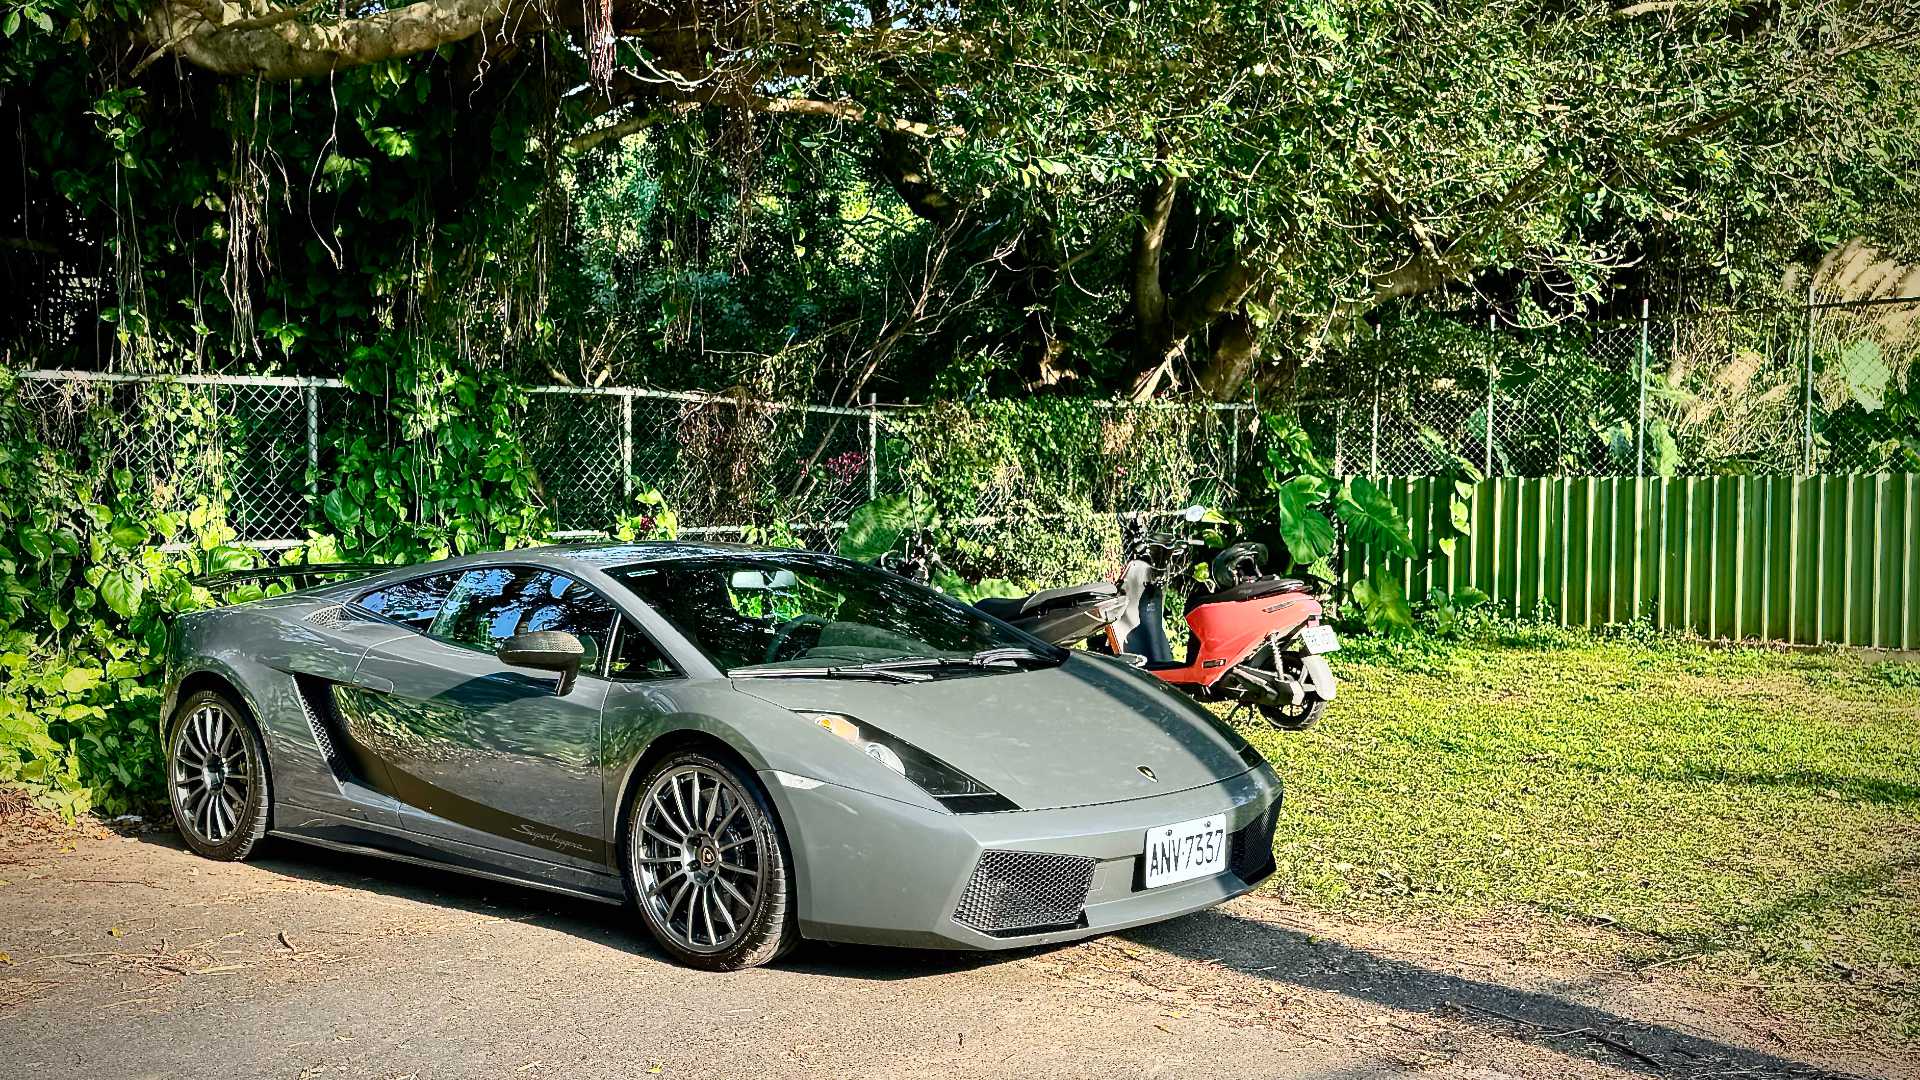 A Lamborghini Gallardo at one end of a paved parking lot, next to two scooters parked on the grass.